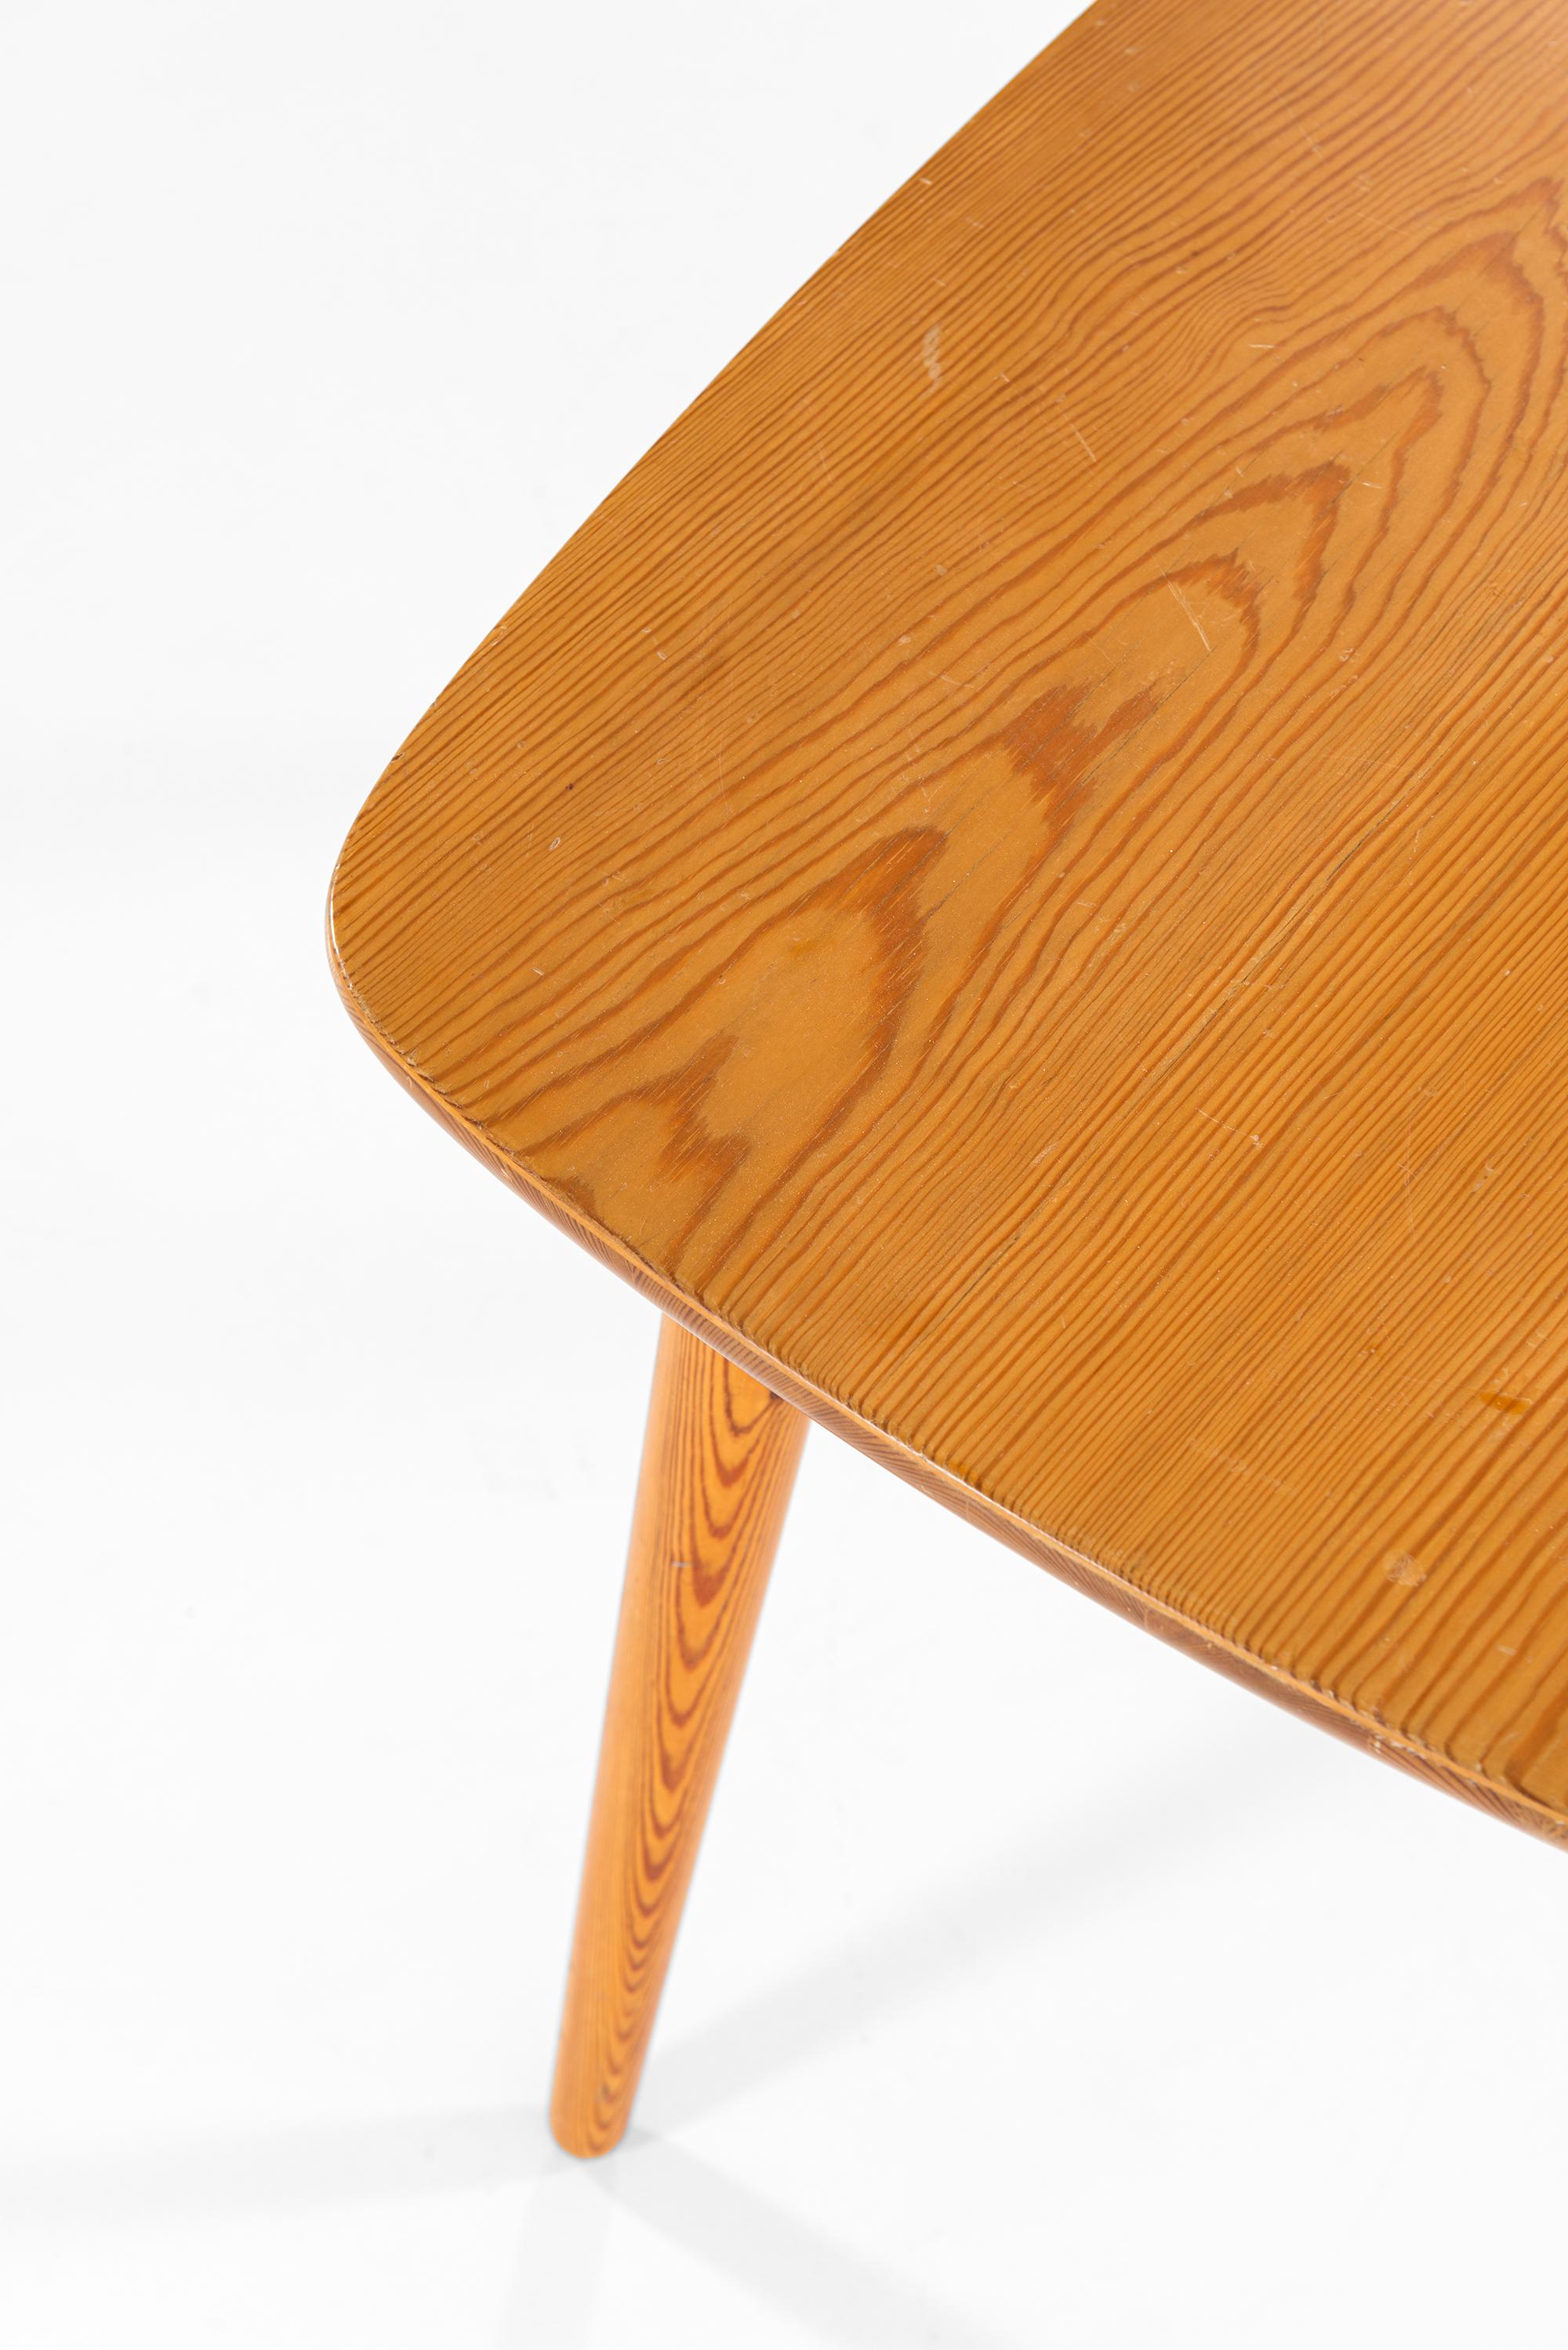 Coffee / side table designed by Göran Malmvall. Produced by Svensk fur in Sweden.